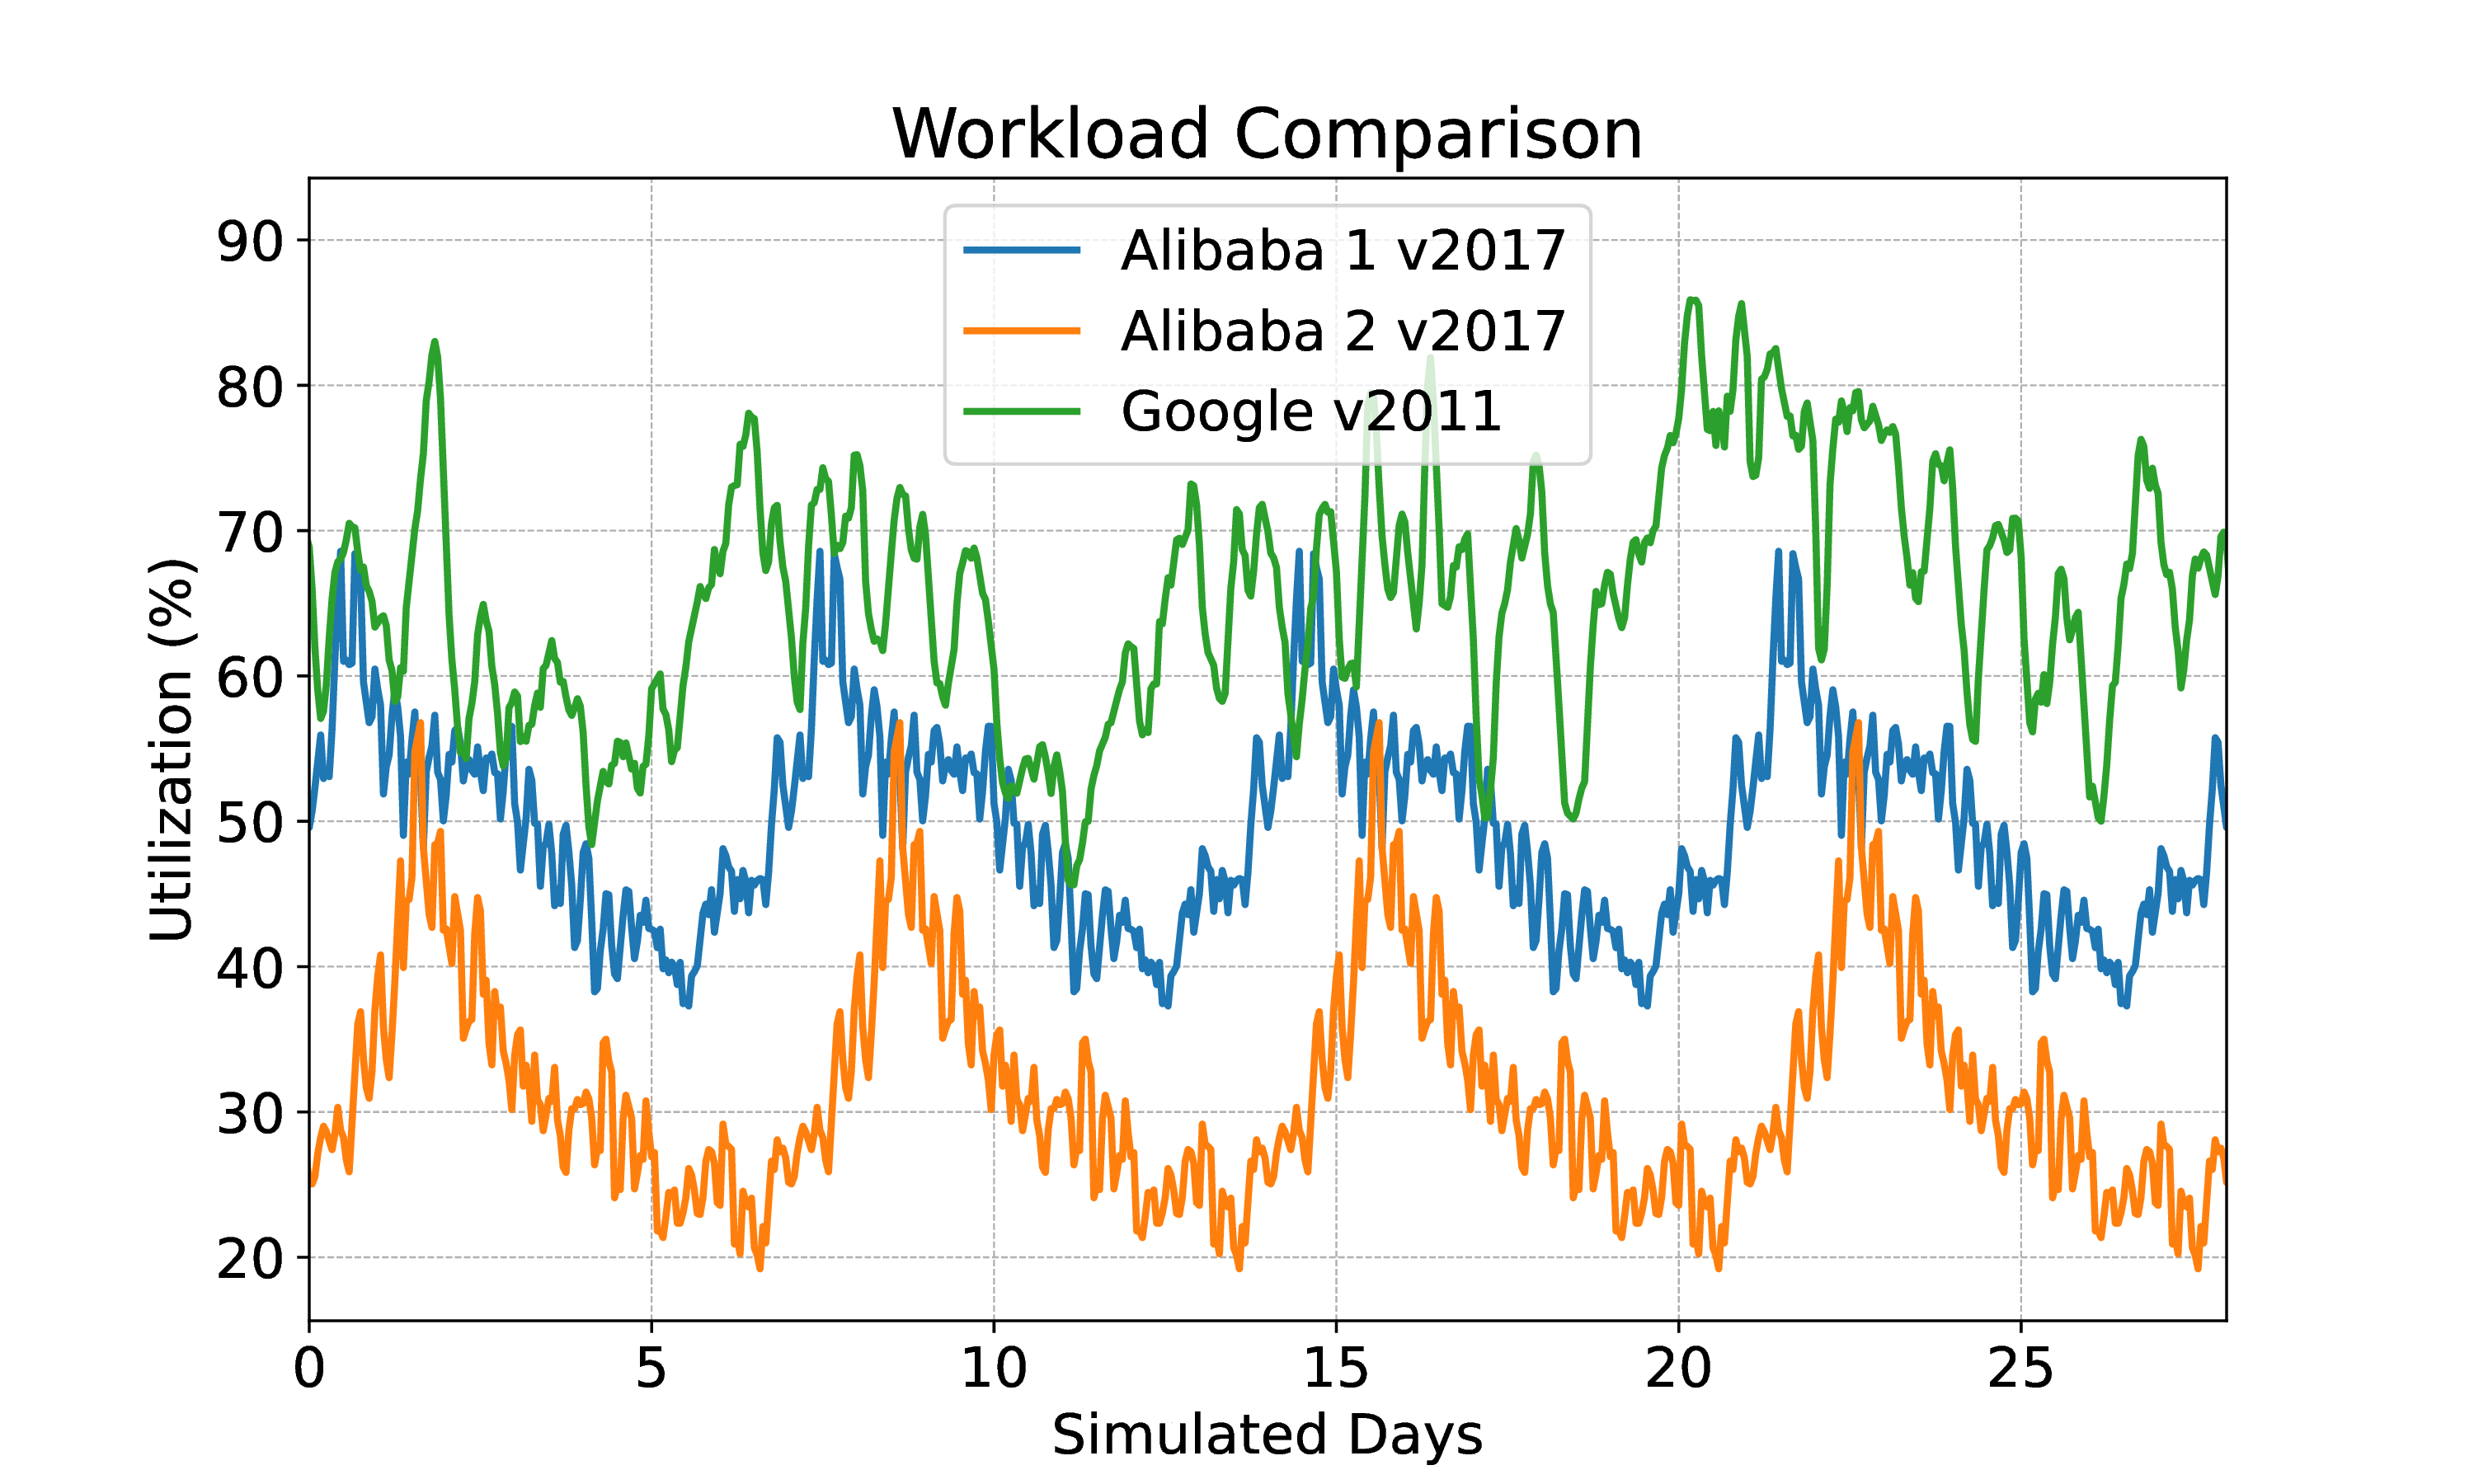 Comparison between two workload traces of Alibaba trace (2017) and Google (2011).